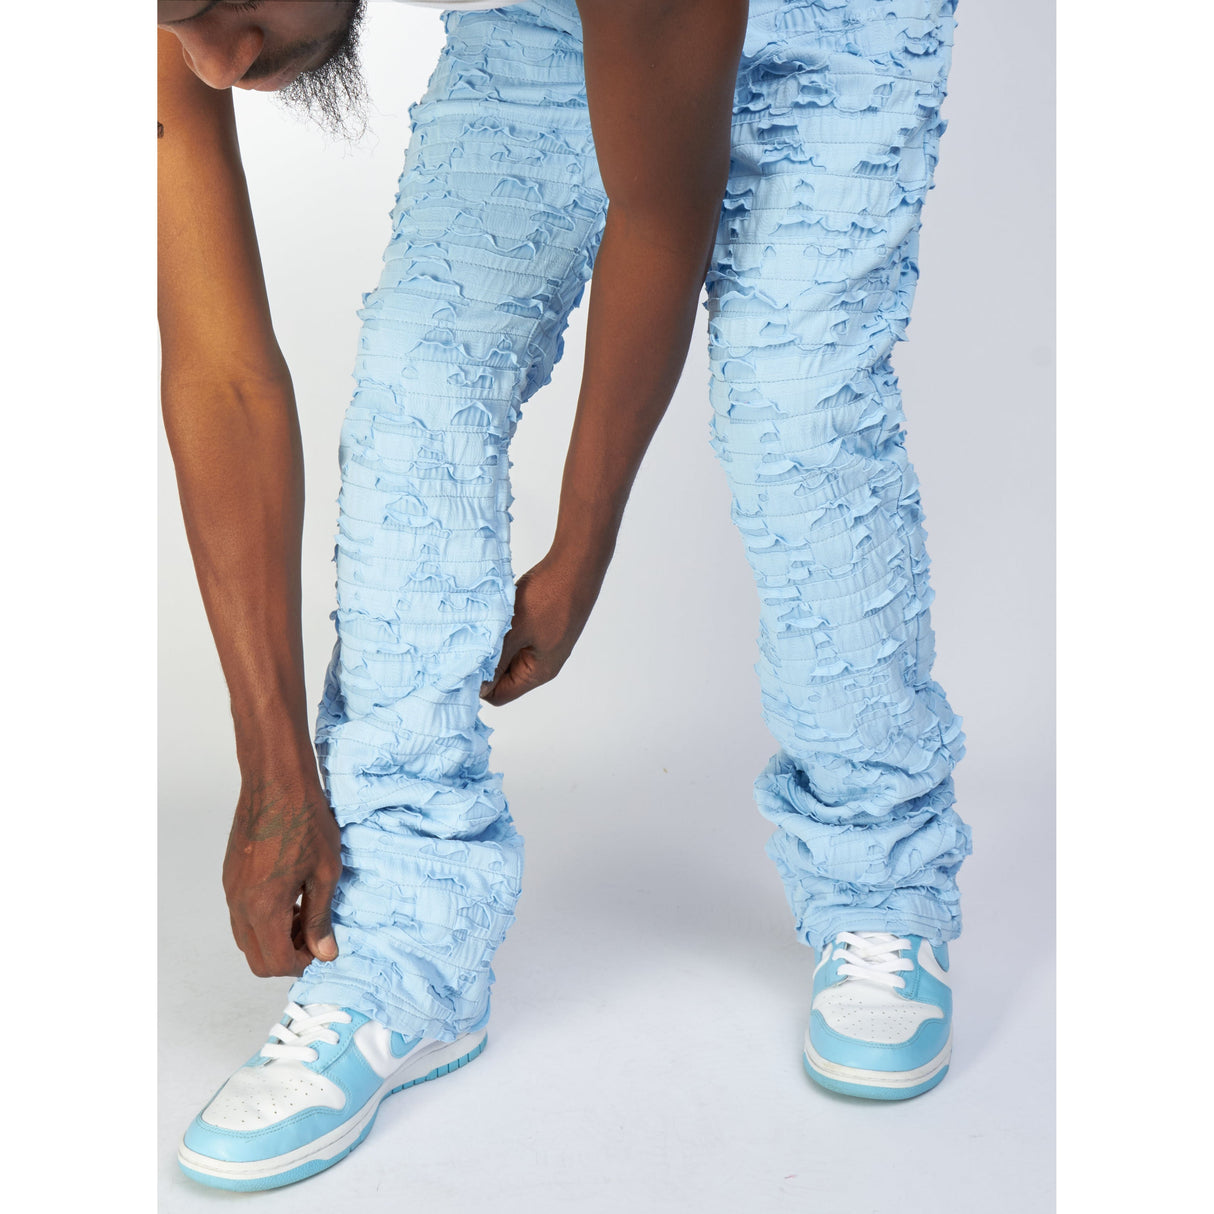 Politics Jeans - Lucas - Baby Blue - Shredded Stacked Flare  - 504